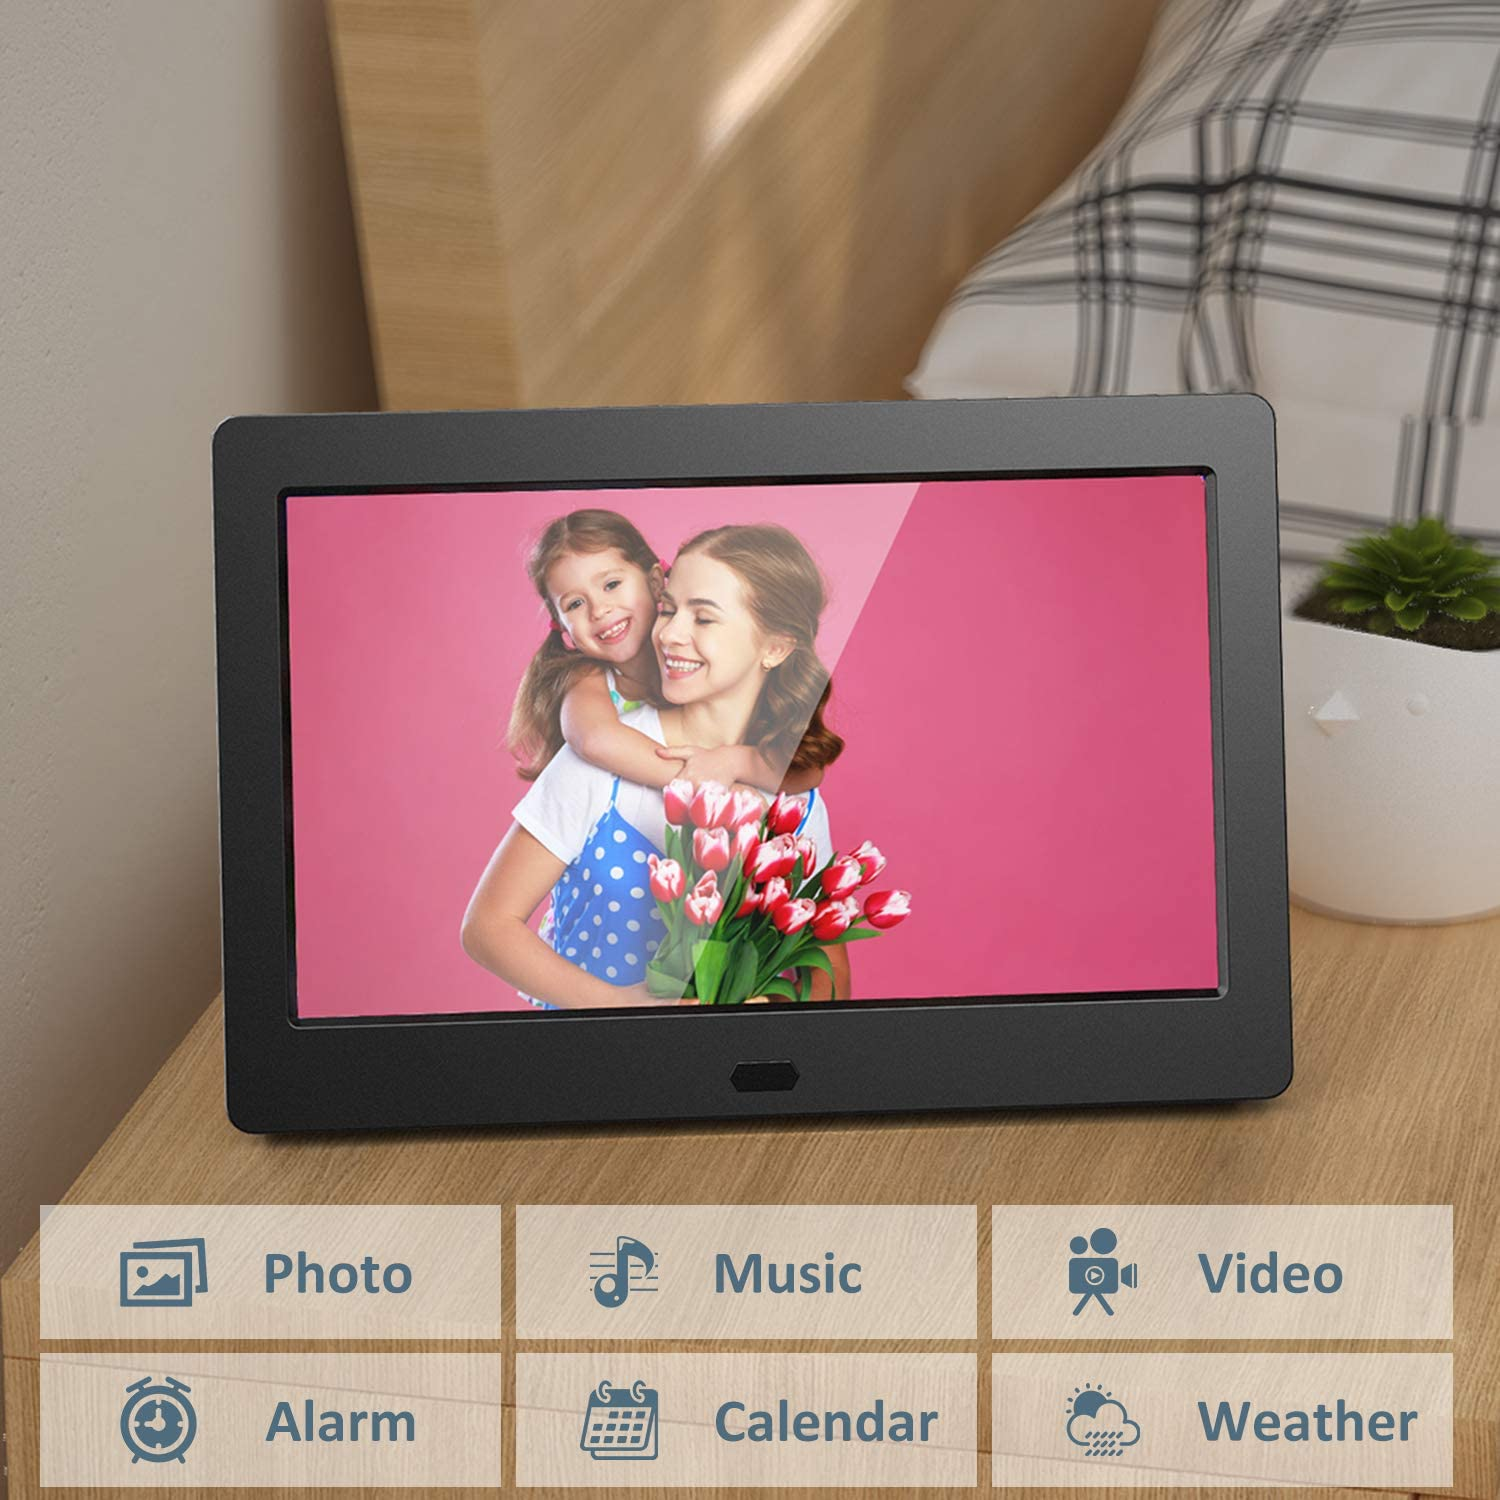 Digital Photo Frame 7 Inch Digital Picture Frame with HD IPS Display Photo/Music/Video Player Calendar Alarm Auto On/Off Timer Remote Control